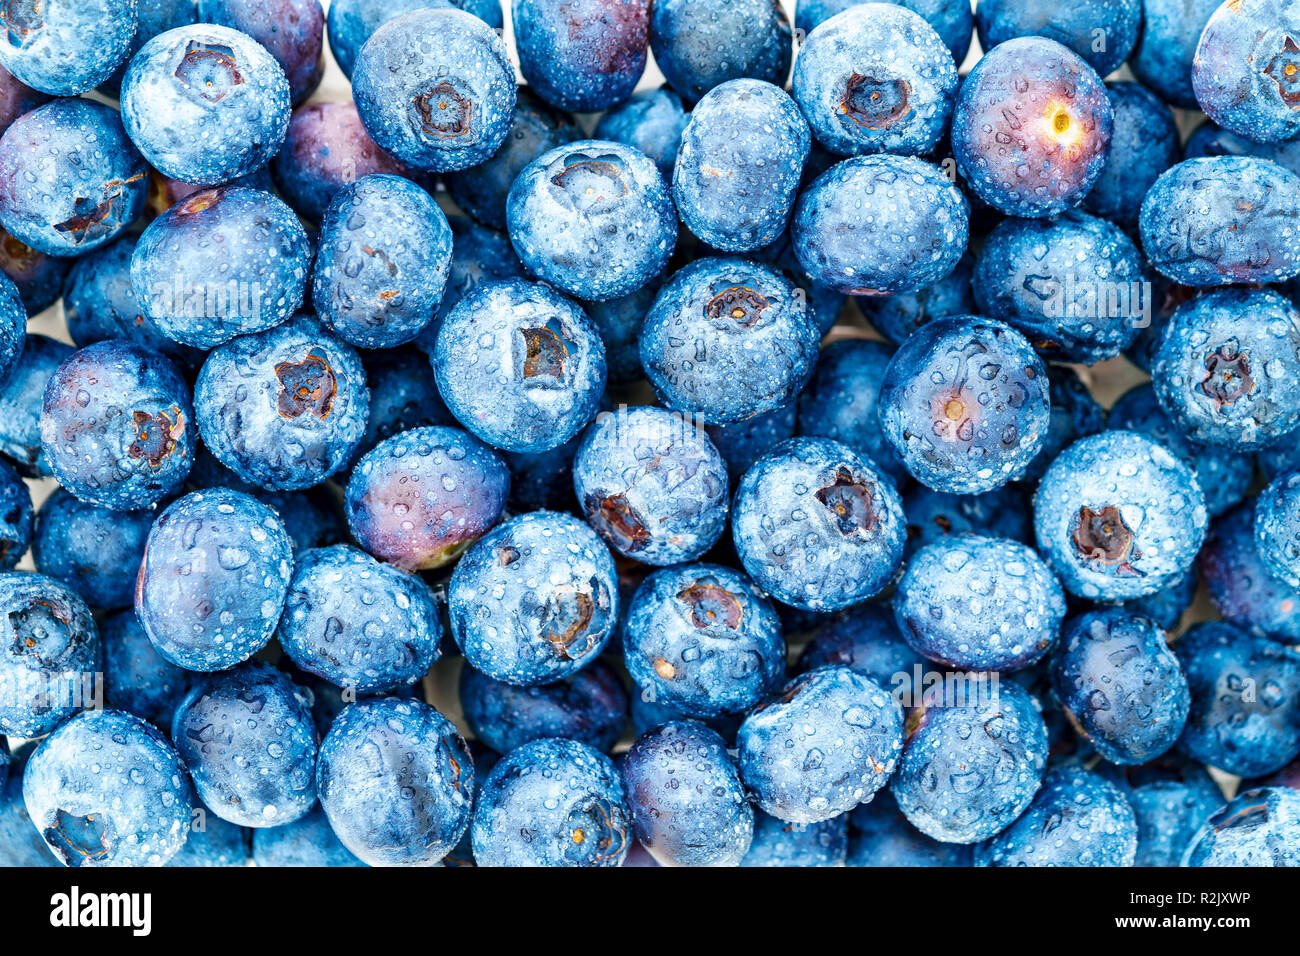 Blueberries with water droplets Stock Photo